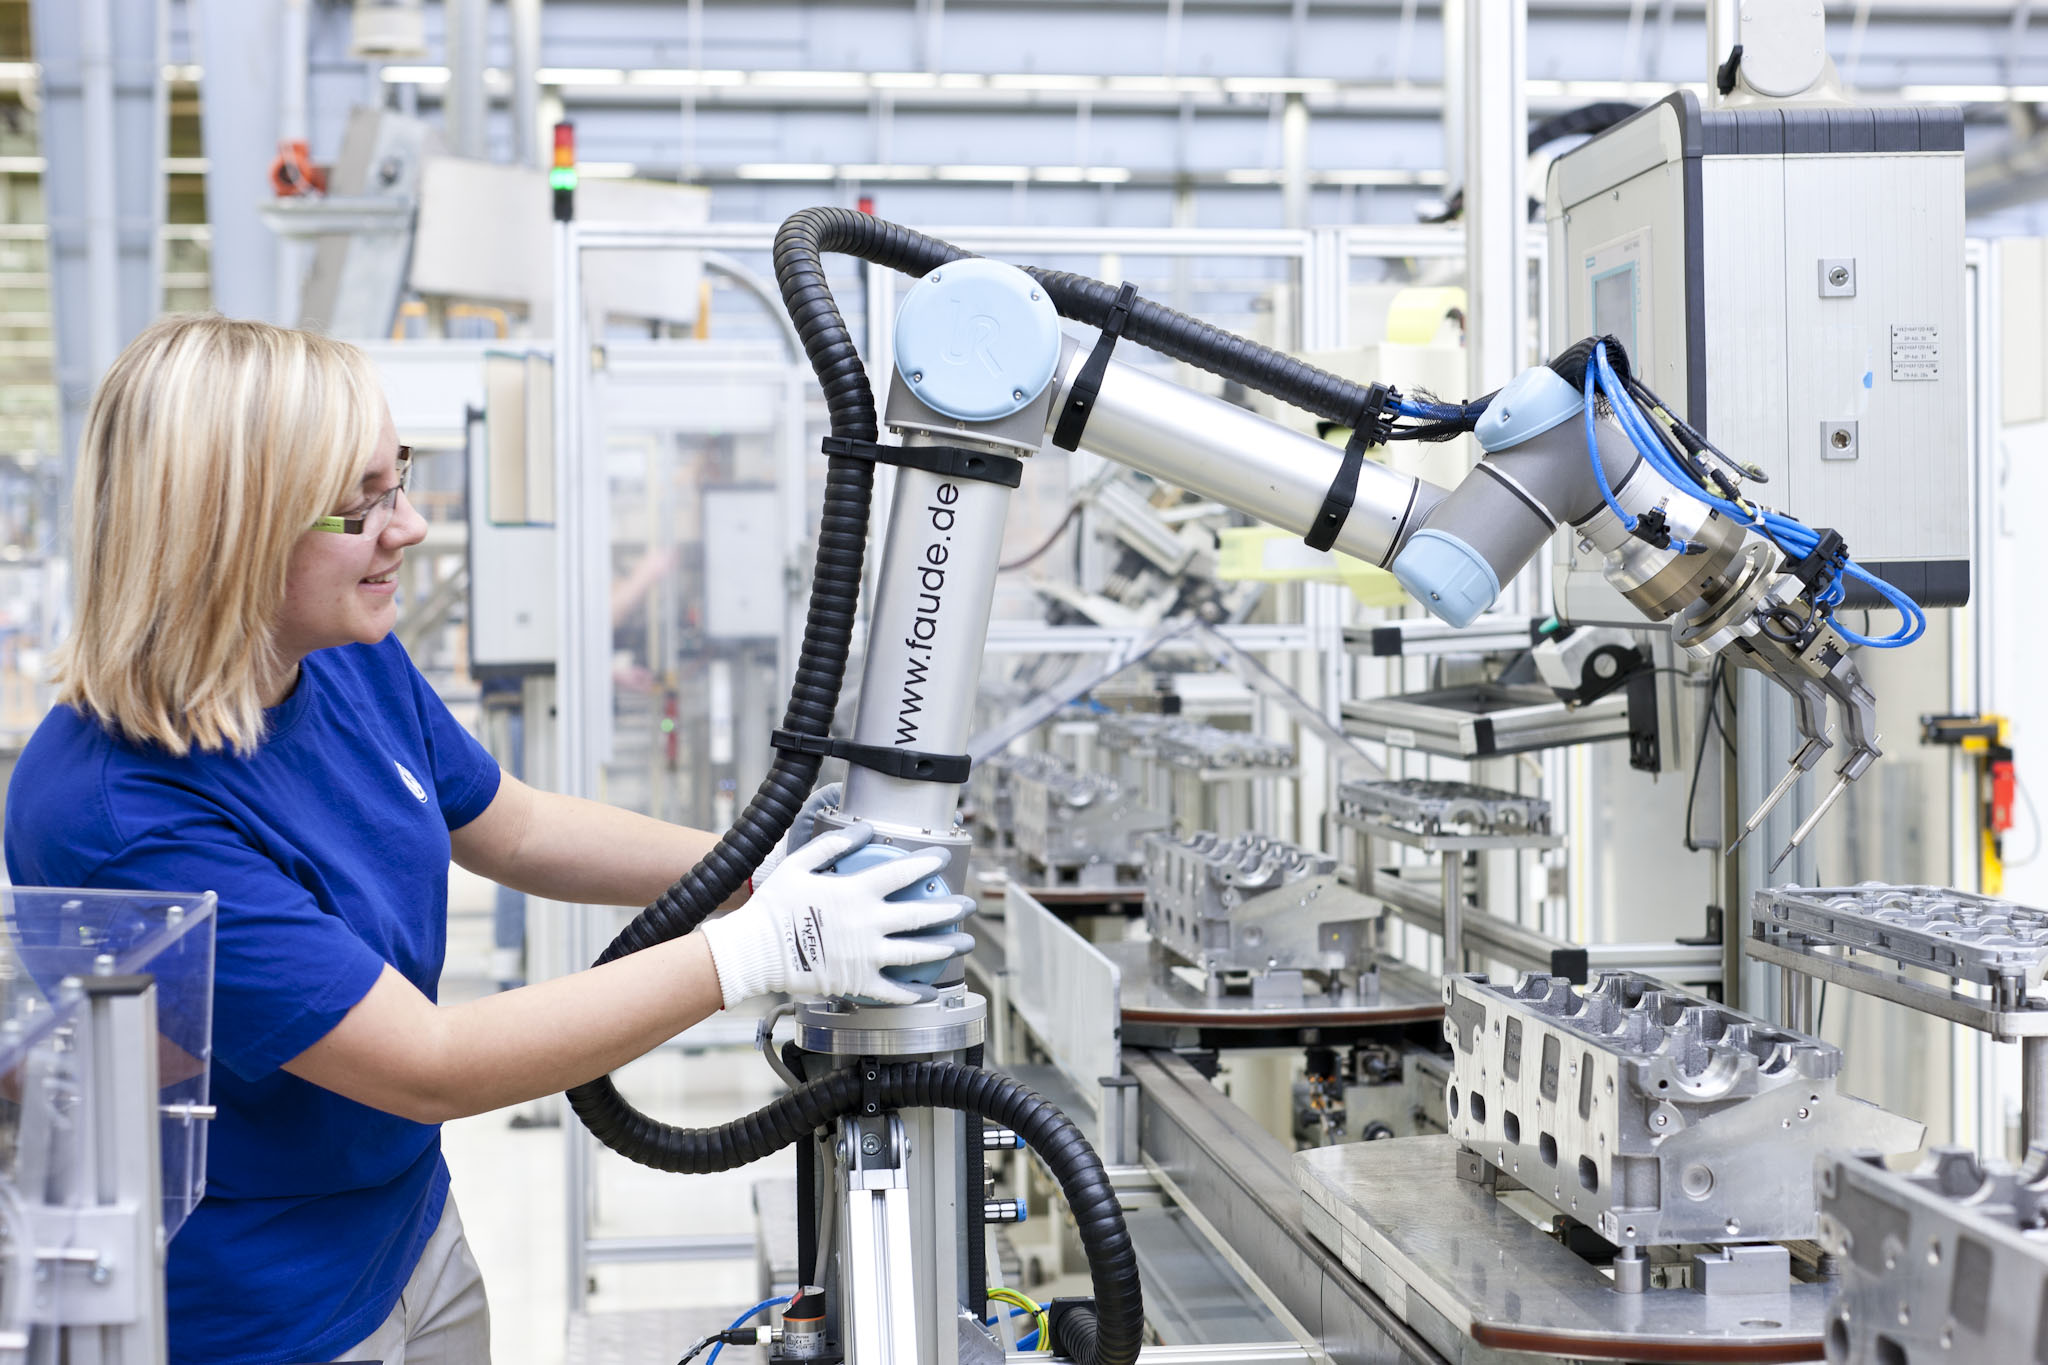 The UR5 robot works directly alongside employees at Volkswagen 